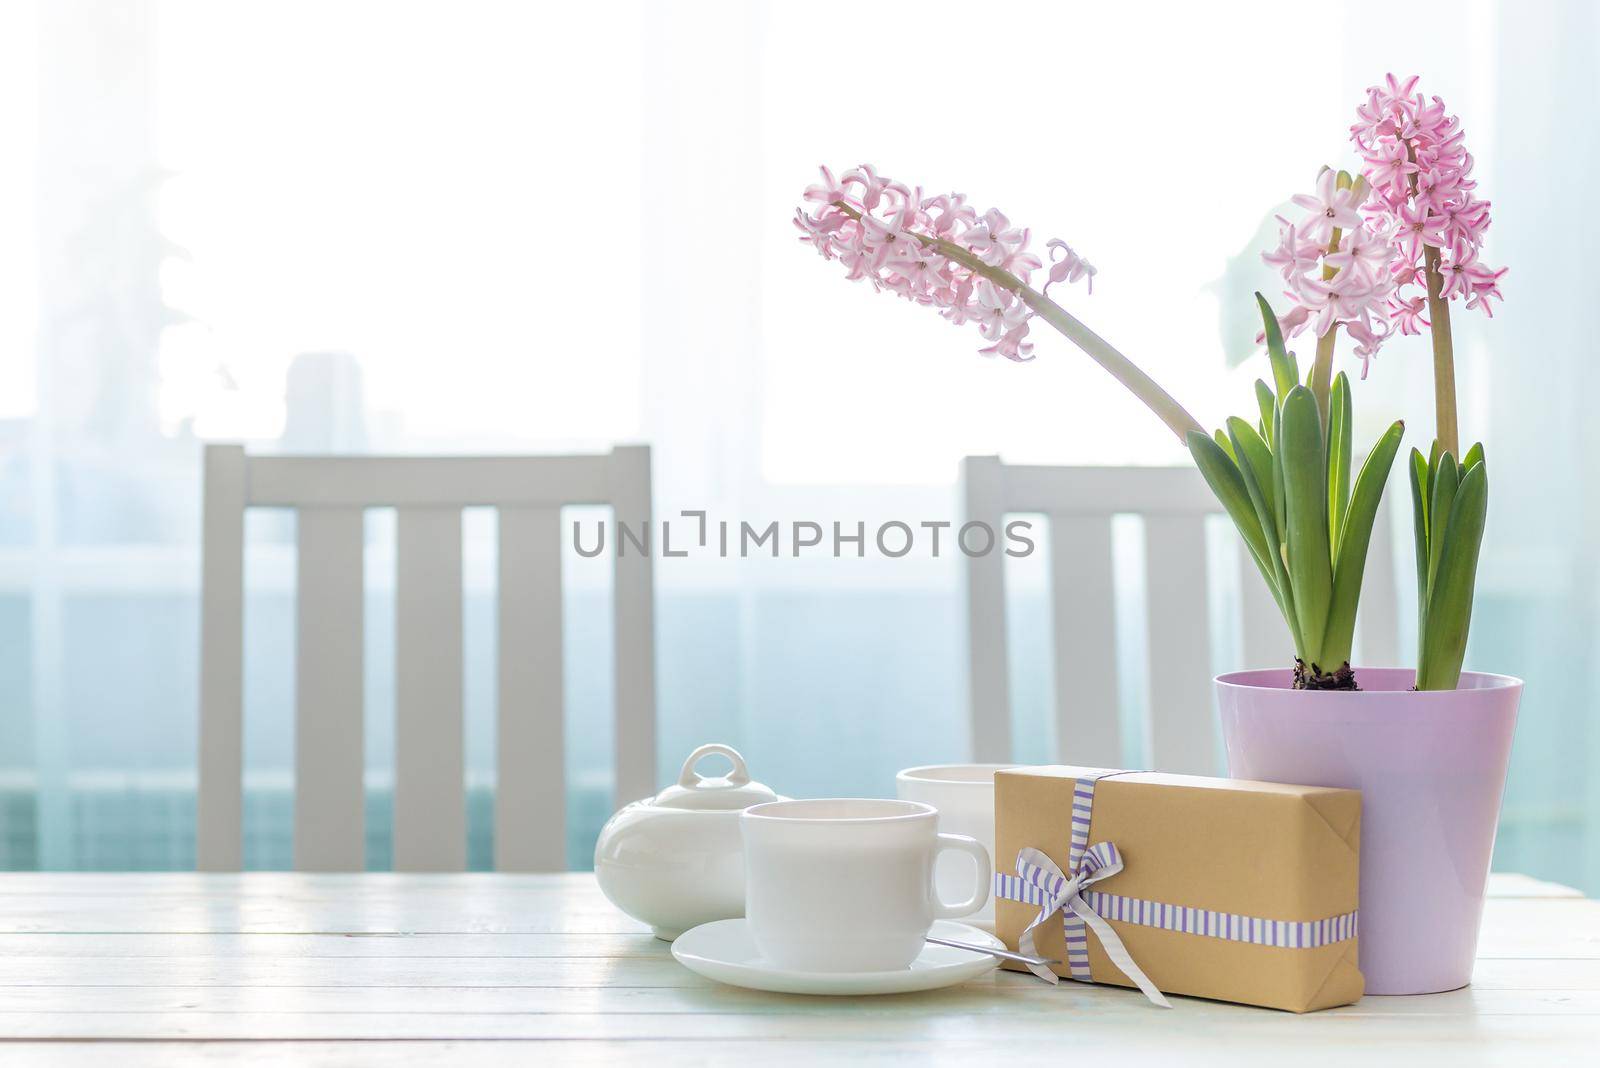 Present gift box with white cups of tea and pink flowers on the white table near window. Lovely spring holiday mood